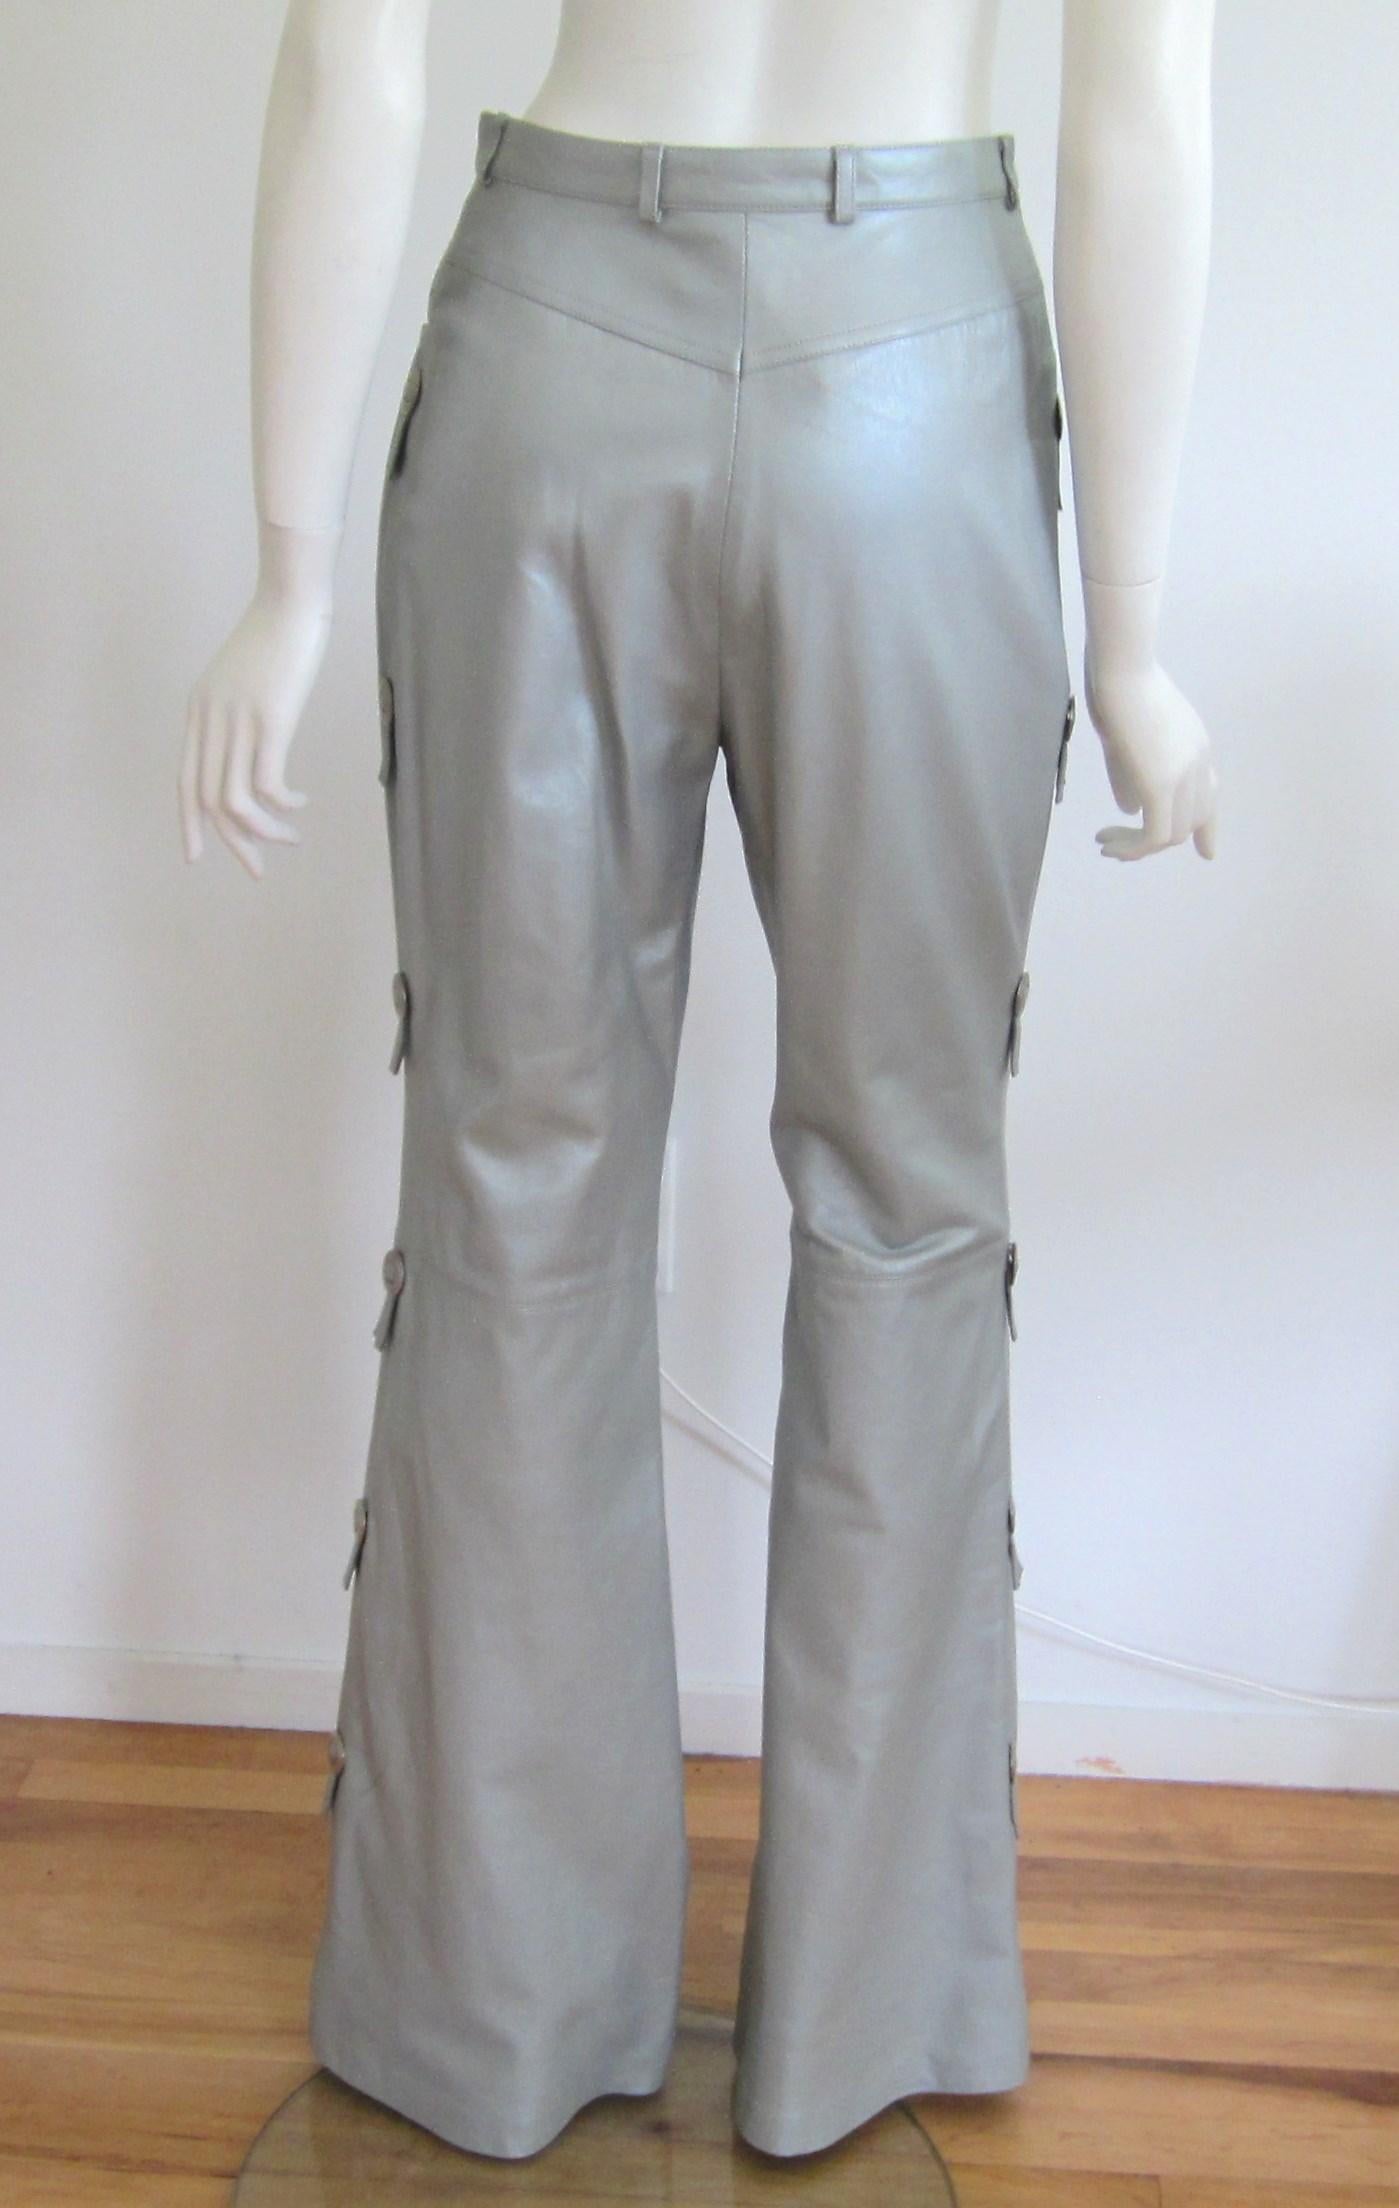  Escada Leather Jacket Pants - Western Motif Grey Suit New With Tags 1990s  For Sale 3